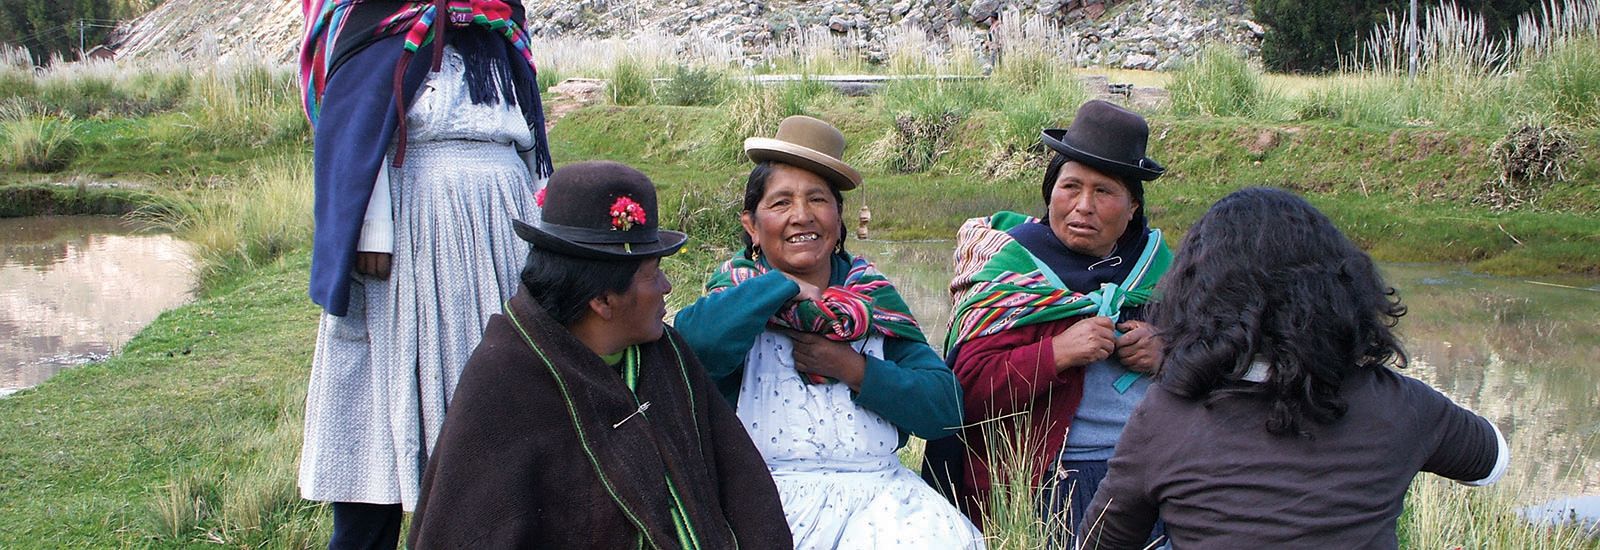 5 people with four in traditional Peruvian clothing